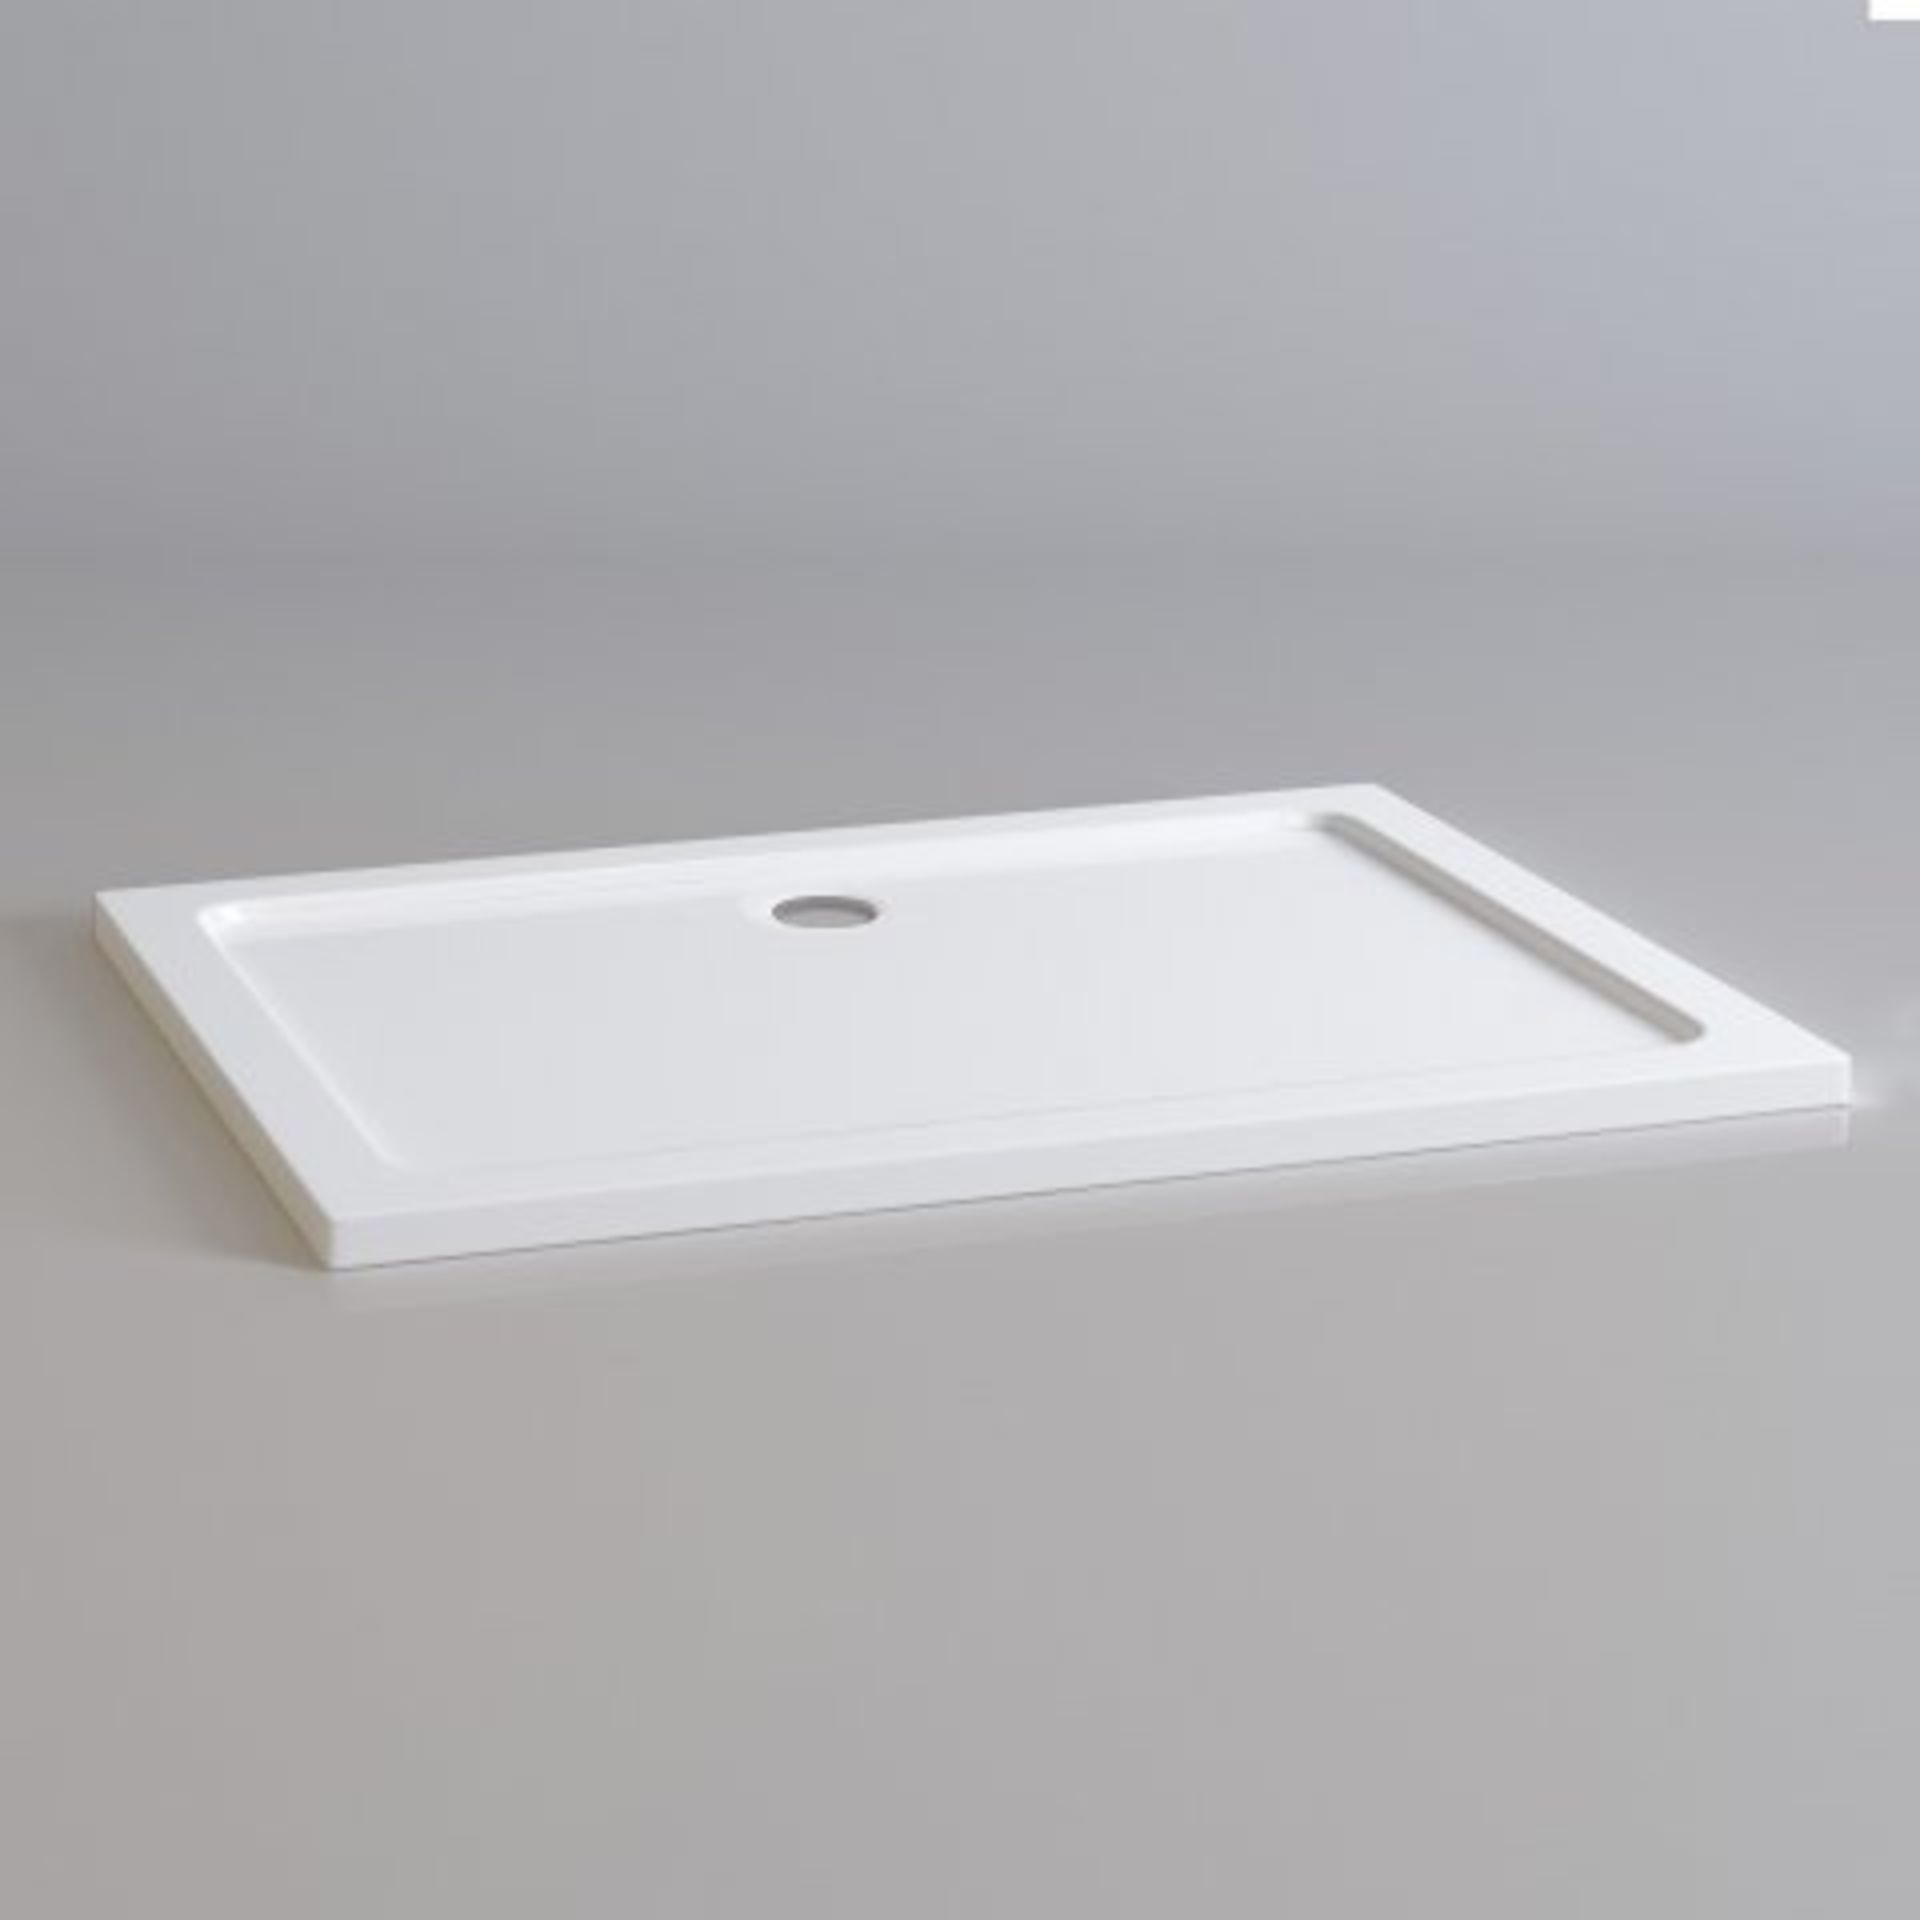 NEW 1200x800mm Rectangular Ultra Slim Stone Shower Tray.RRP £399.99.Our brilliant white trays ... - Image 2 of 2